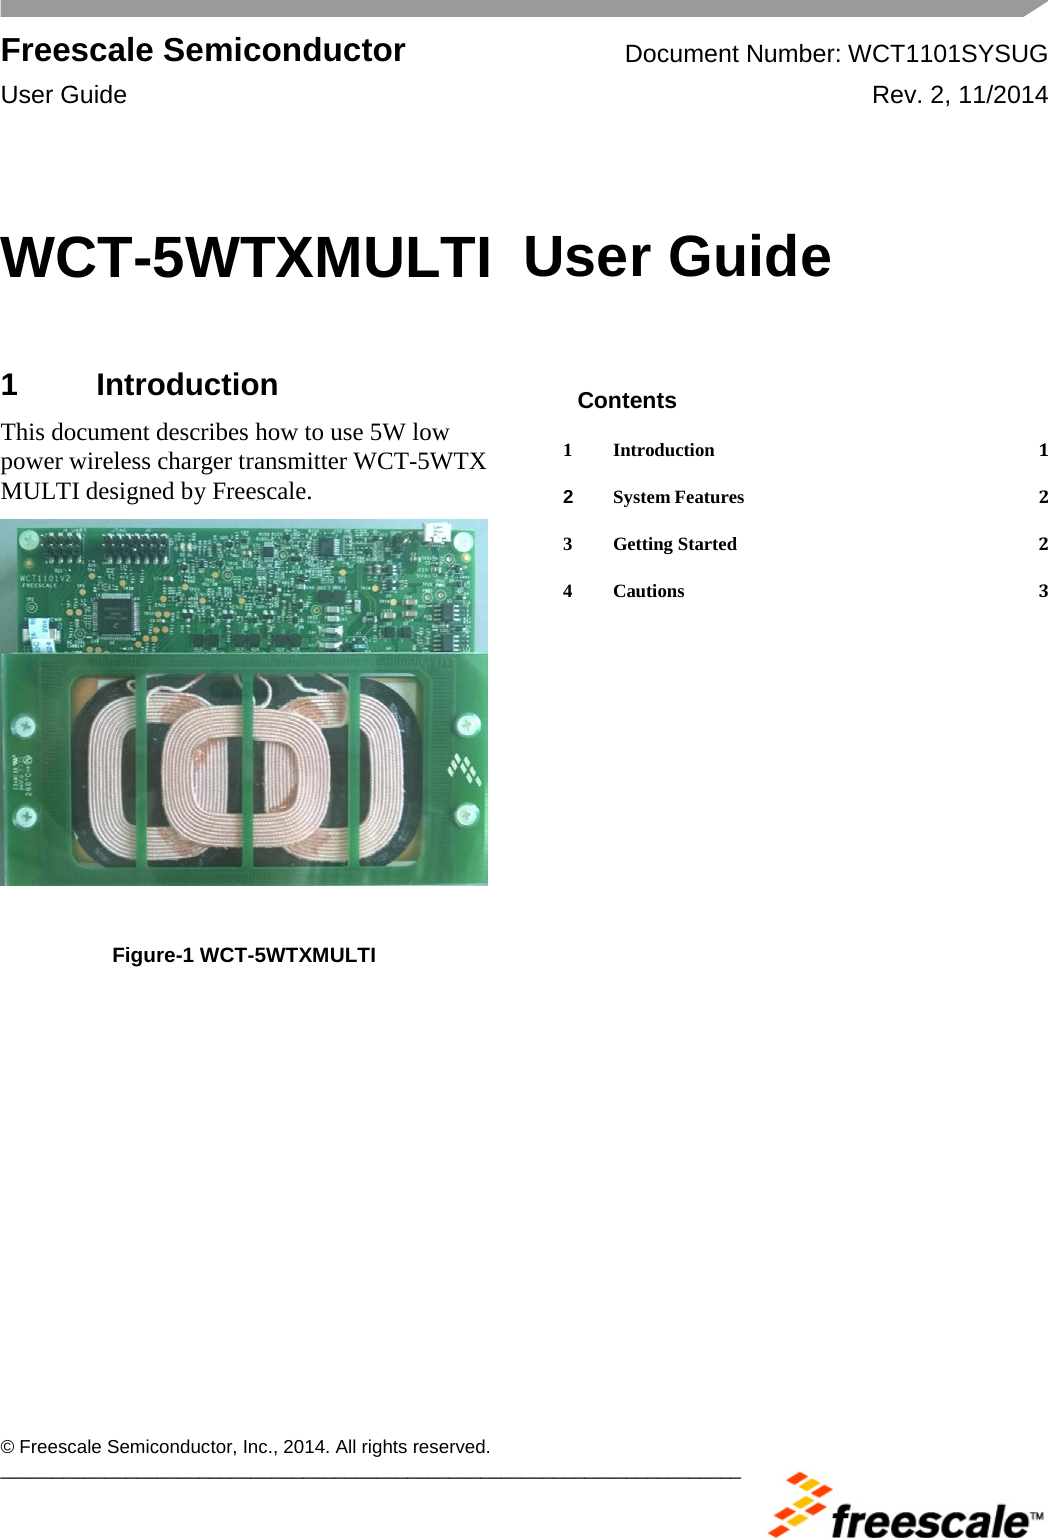  Freescale Semiconductor Document Number: WCT1101SYSUG User Guide Rev. 2, 11/2014       © Freescale Semiconductor, Inc., 2014. All rights reserved. _______________________________________________________________________ WCT-5WTXMULTI  User Guide  1  Introduction This document describes how to use 5W low power wireless charger transmitter WCT-5WTX MULTI designed by Freescale.    Figure-1 WCT-5WTXMULTI  Contents 1 Introduction  1 2 System Features  2 3 Getting Started  2 4 Cautions  3  